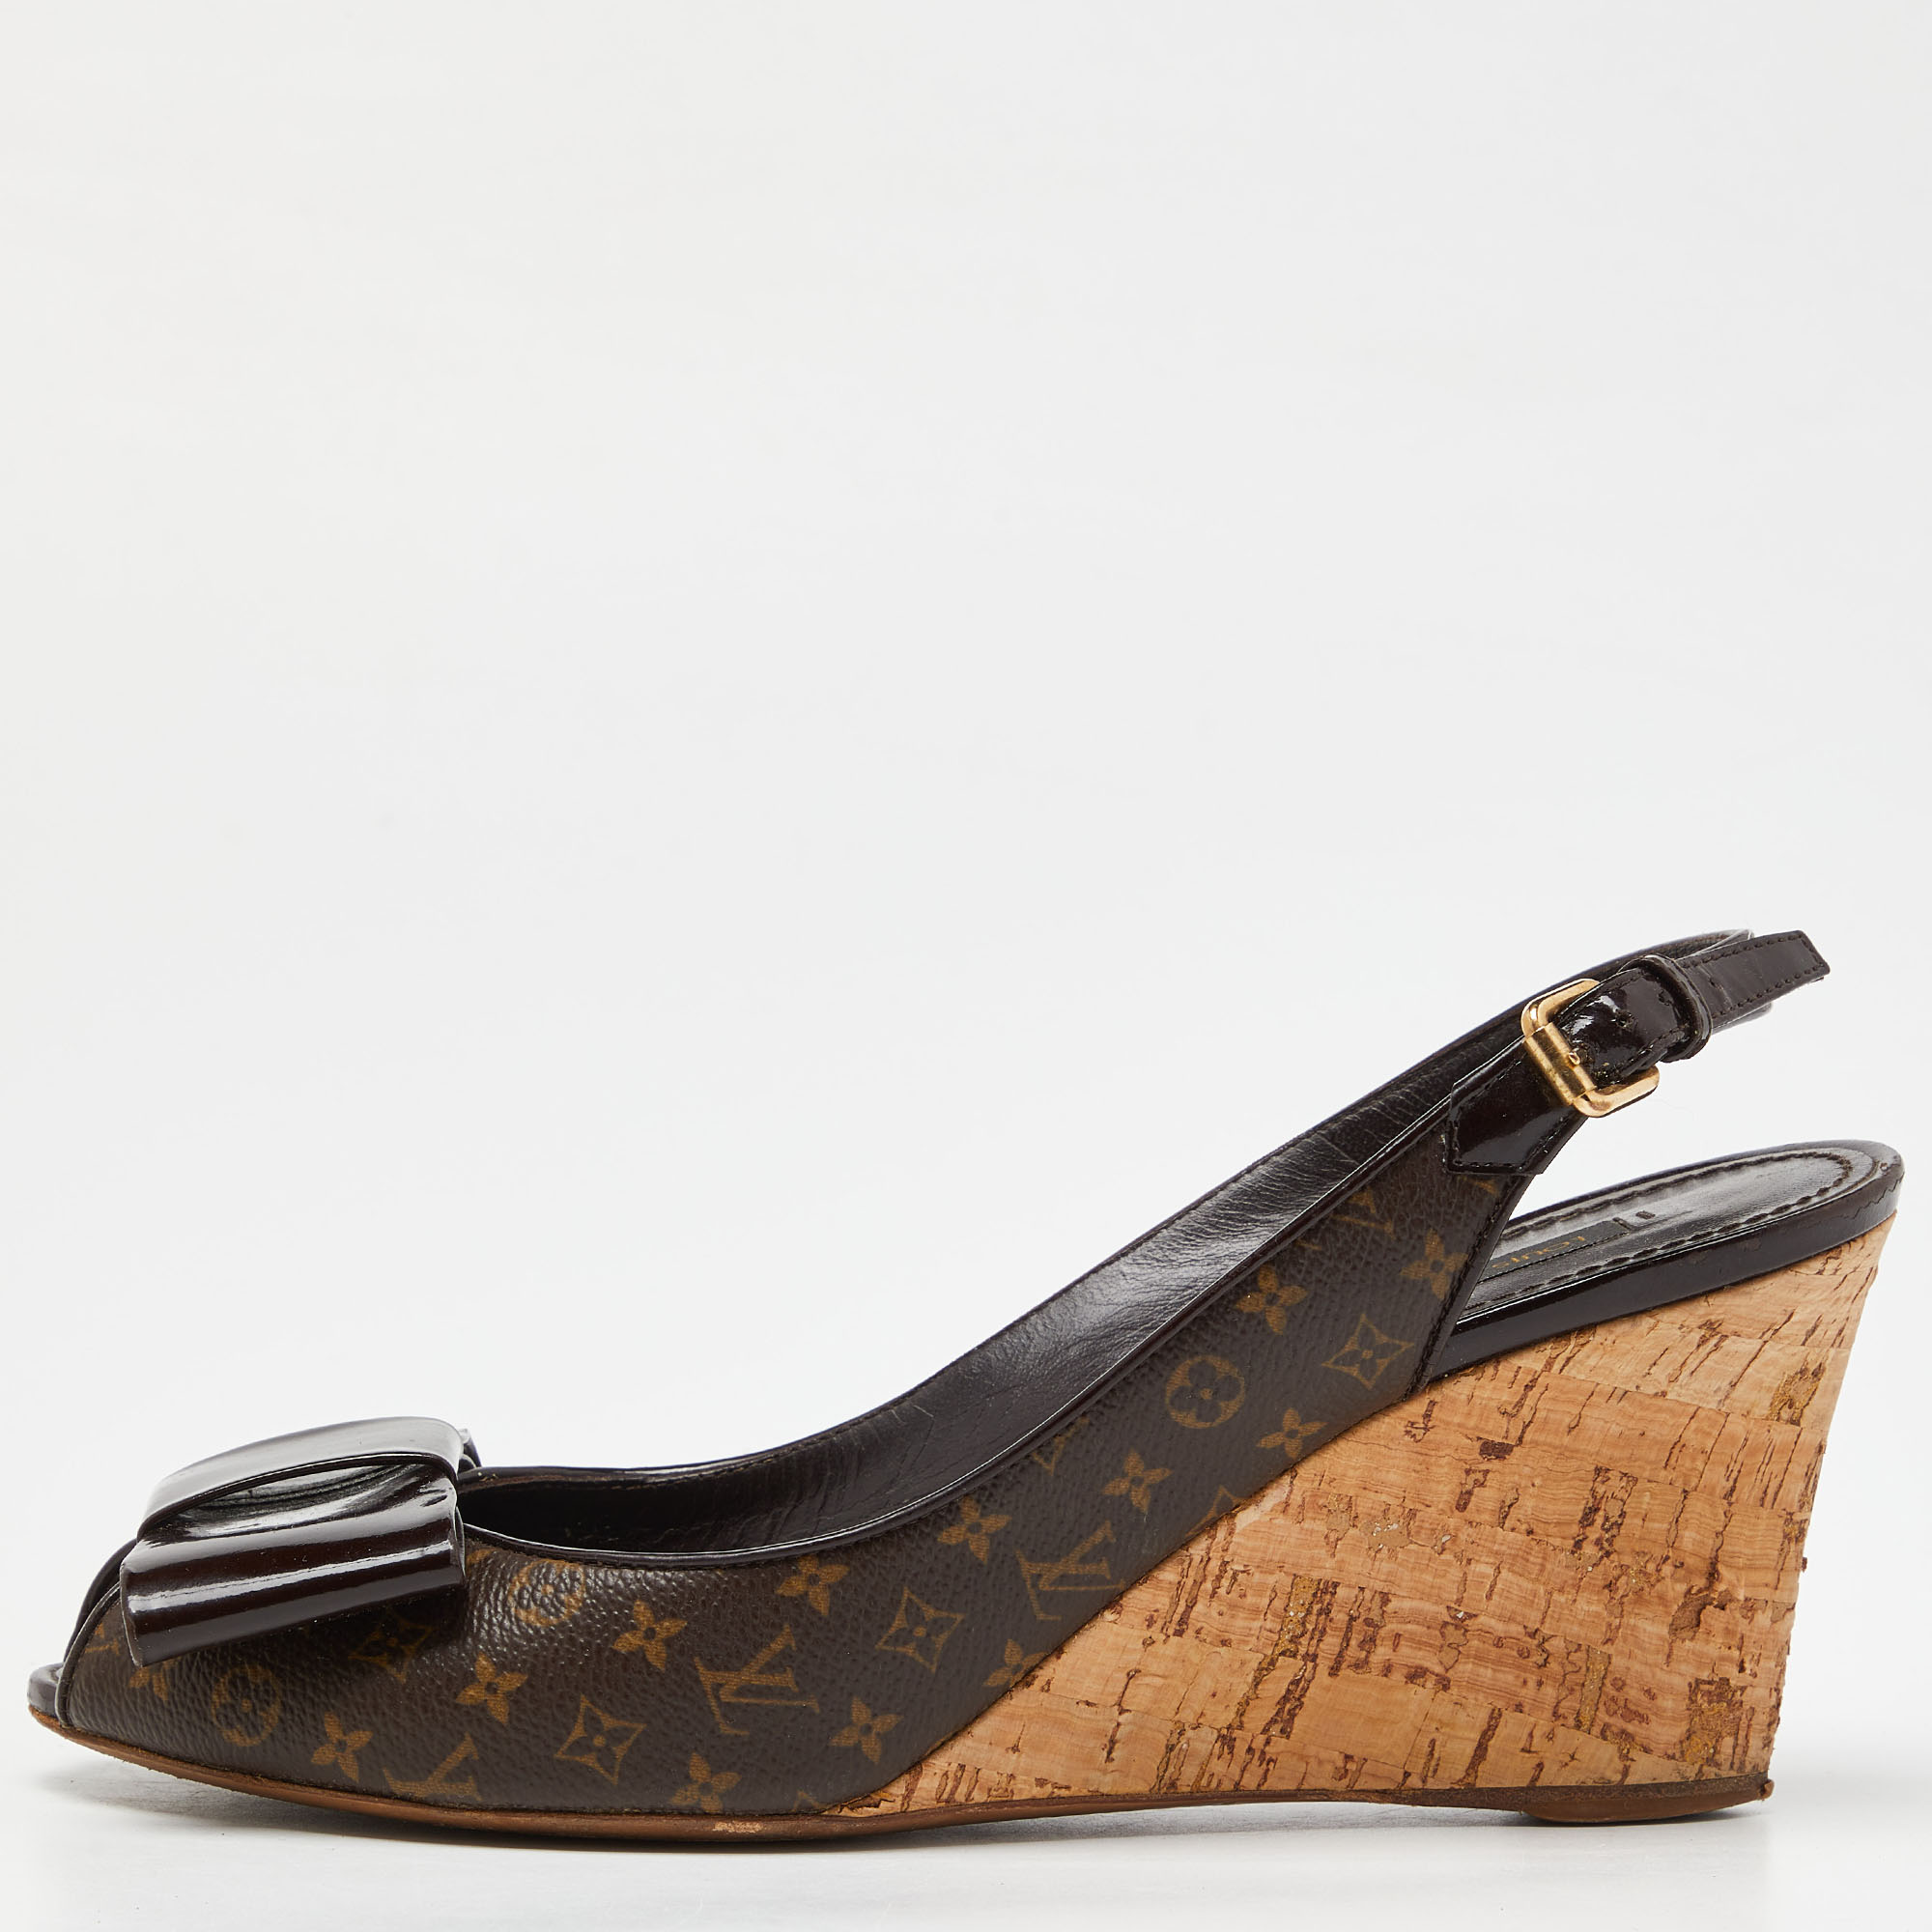 The fashion house's tradition of excellence coupled with modern design sensibilities works to make these LV wedge pumps a fabulous choice. Theyll help you deliver a chic look with ease.